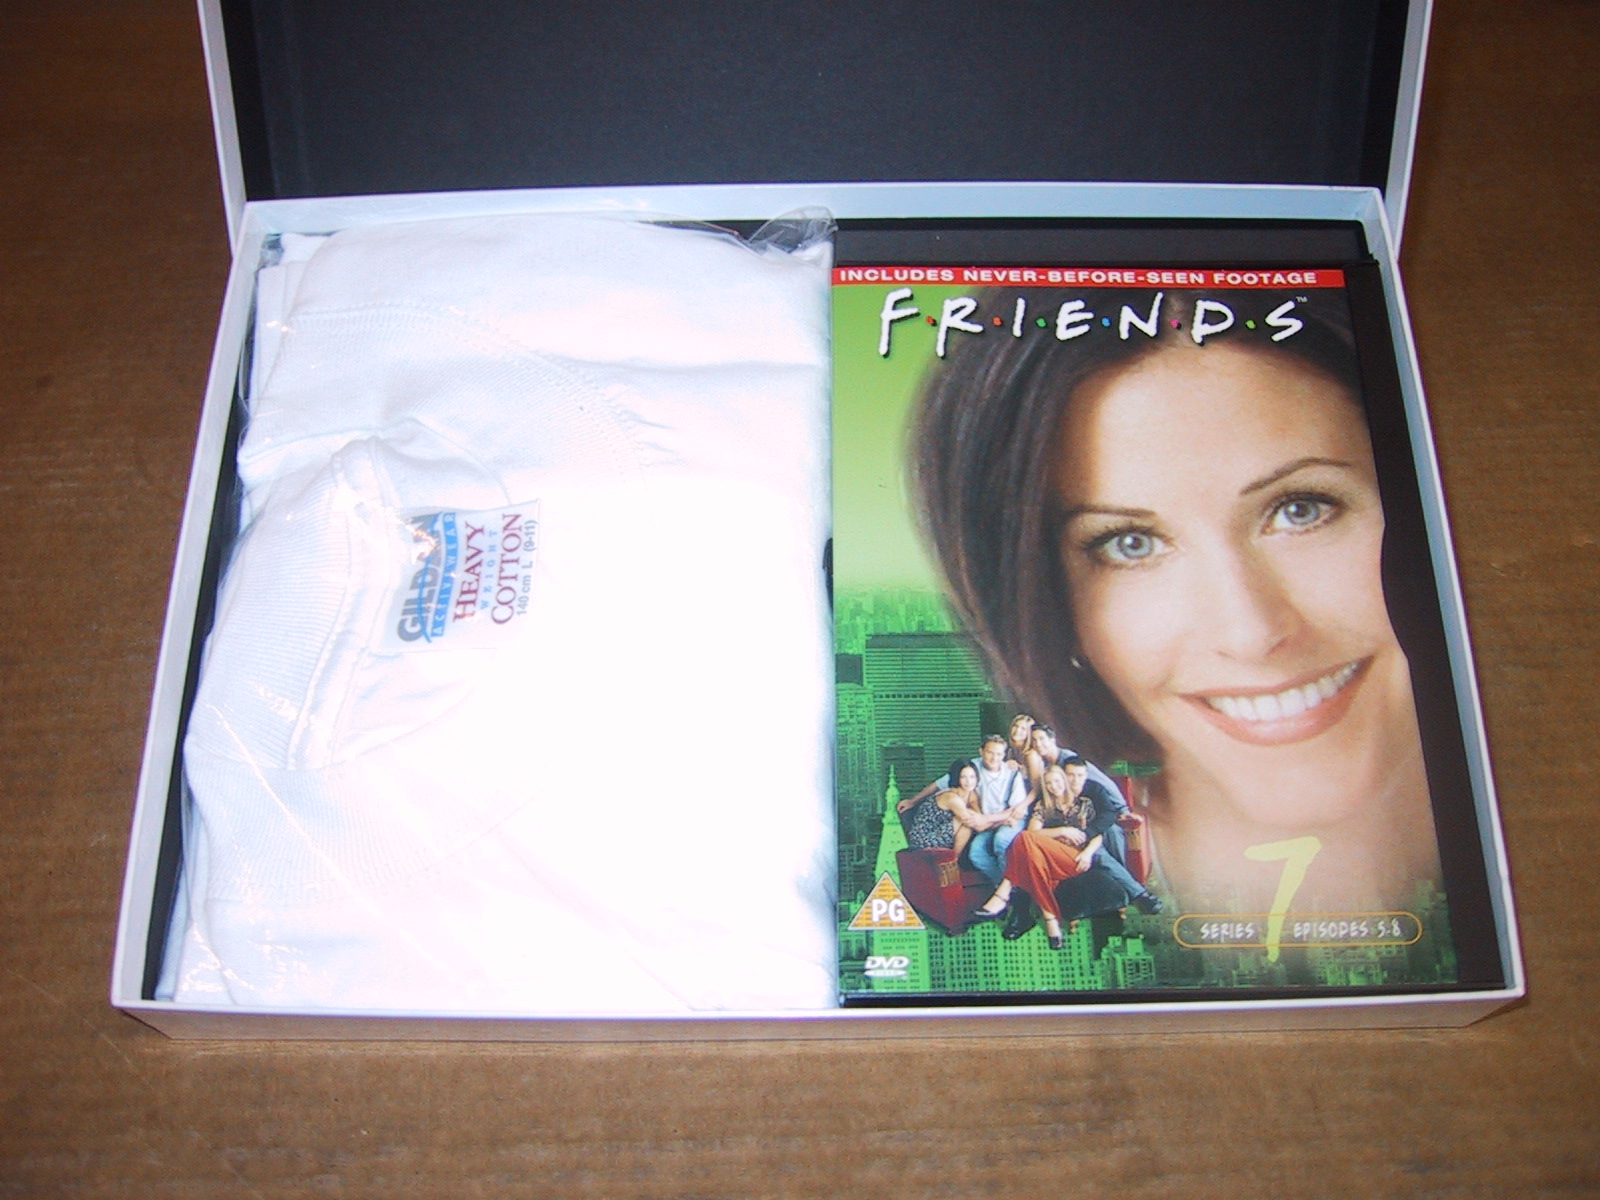 DVD and boxed t-shirt